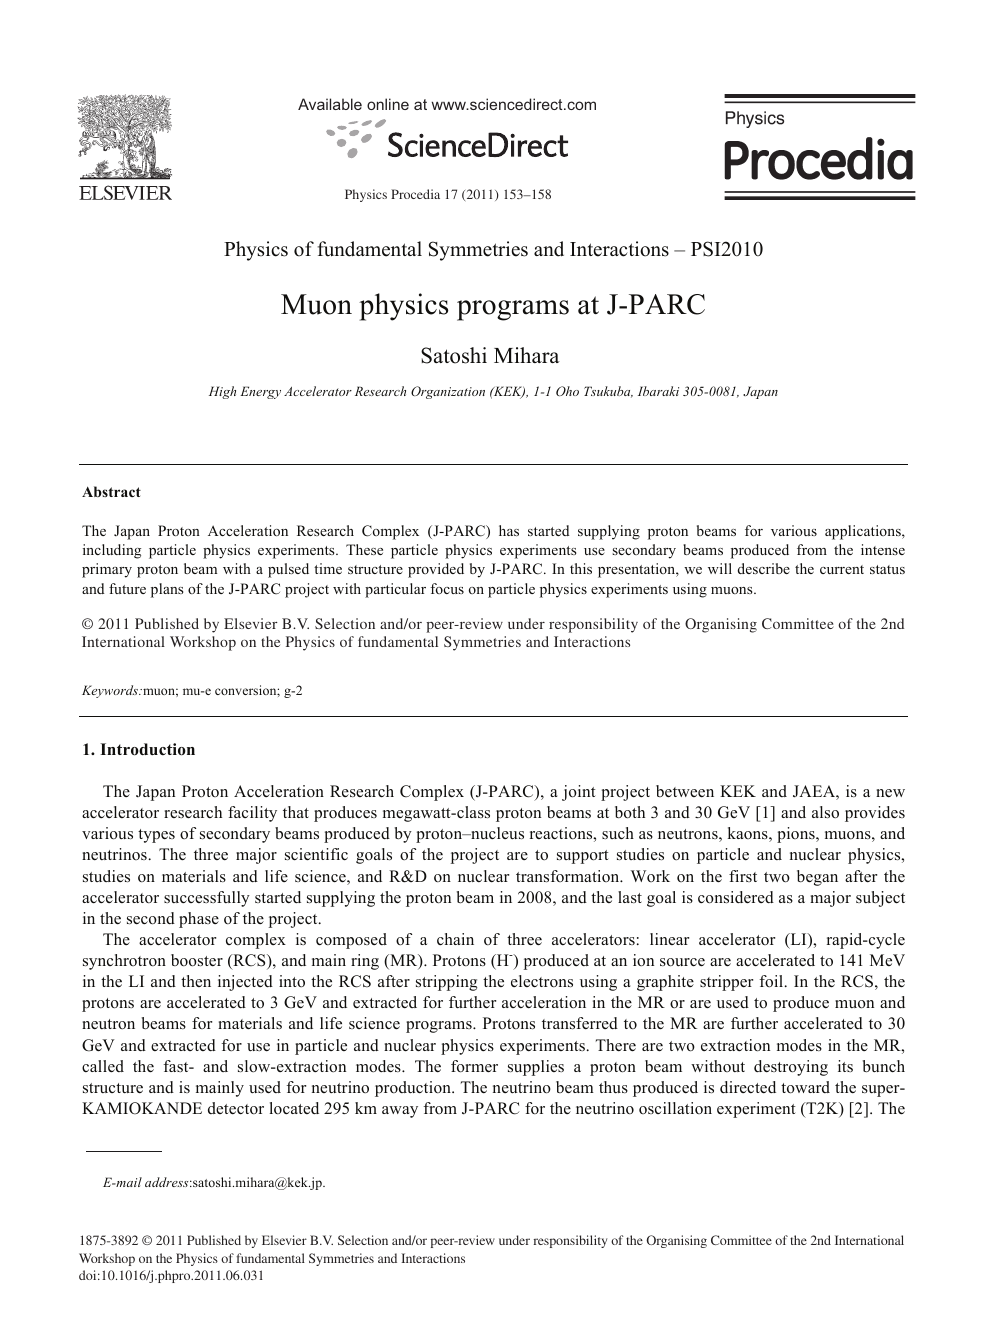 Muon Physics Programs At J Parc Topic Of Research Paper In Physical Sciences Download Scholarly Article Pdf And Read For Free On Cyberleninka Open Science Hub